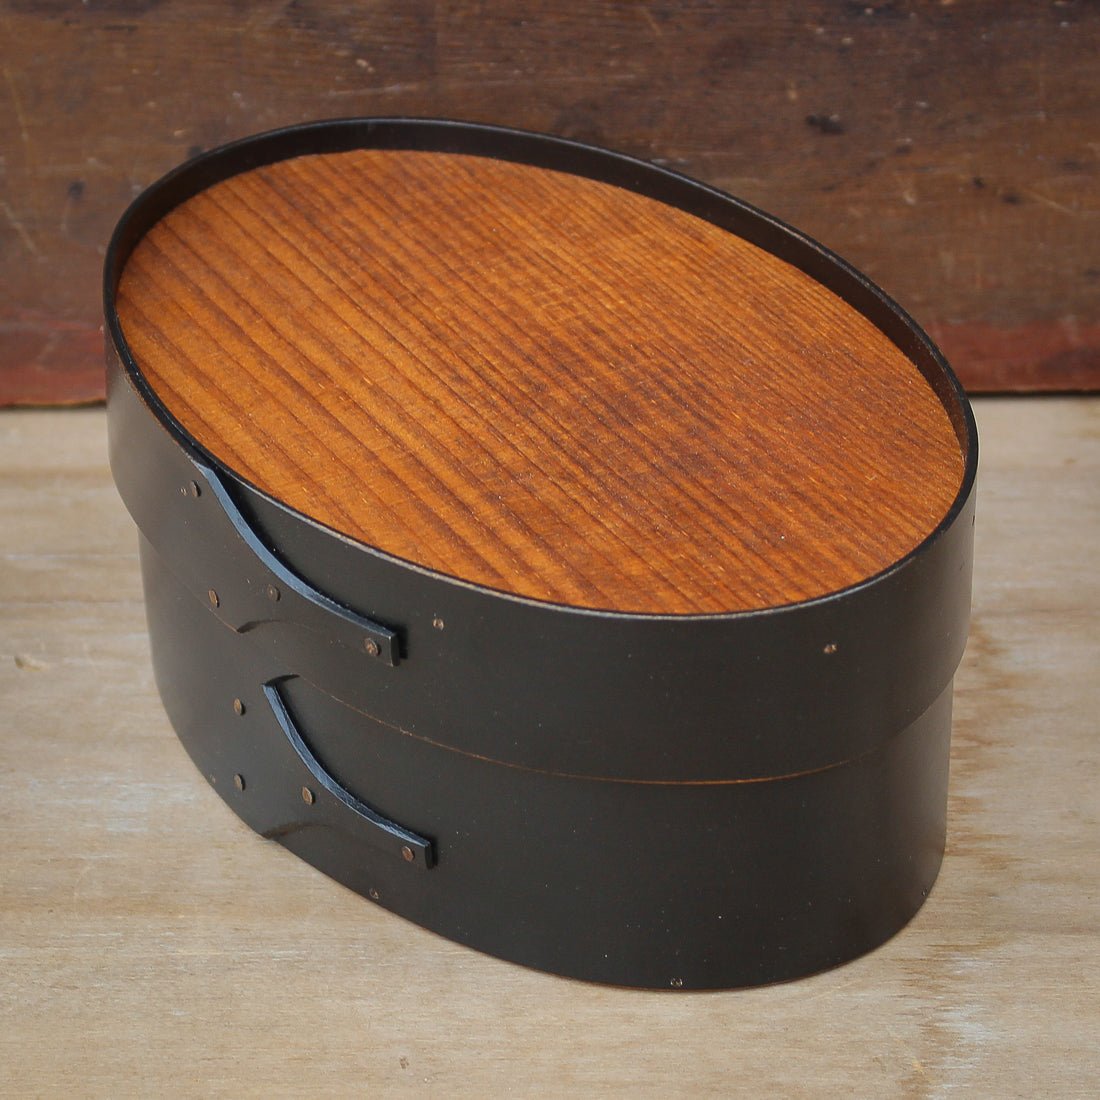 Shaker Oval Box with Recessed Lid for Needlework, Size #3, LeHays Shaker Boxes, Black Milk Paint Finish, Side View